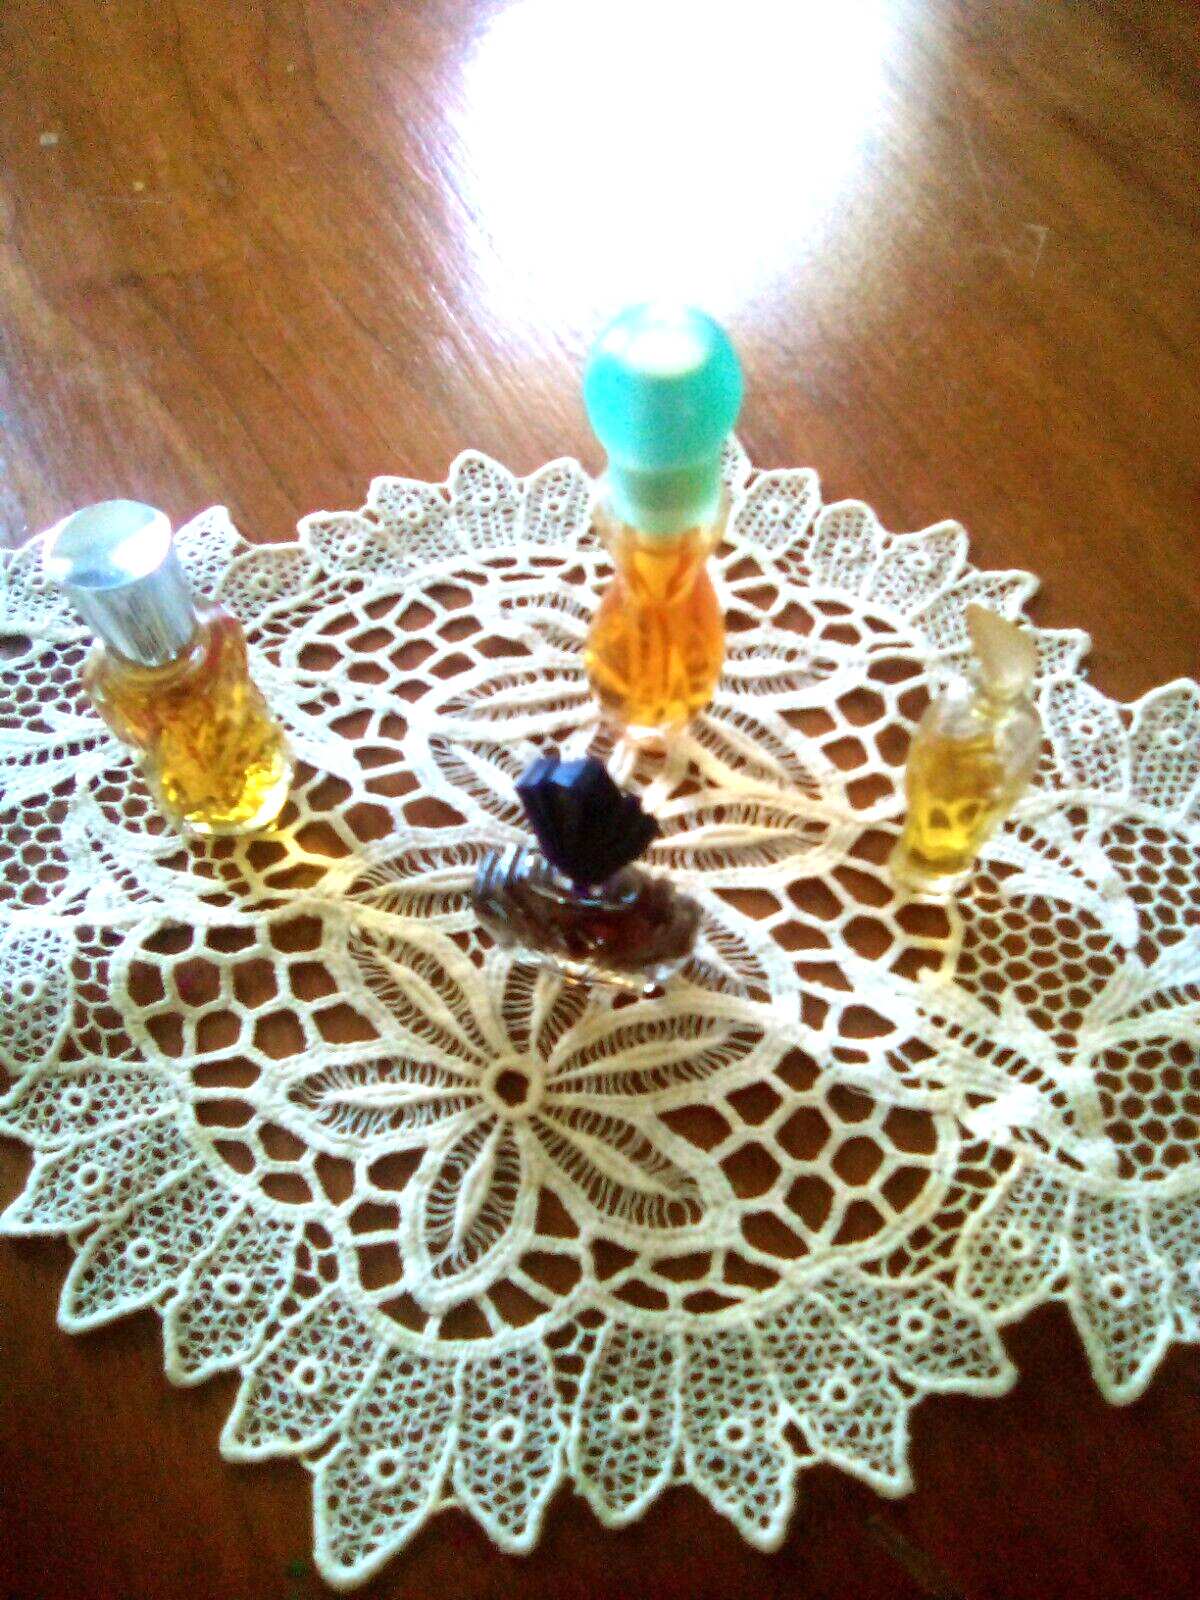 MINI PERFUME COLOGNE BOTTLES 4 CT  WINGS--GIVENCHY- MOSTLY FULL LOT #2